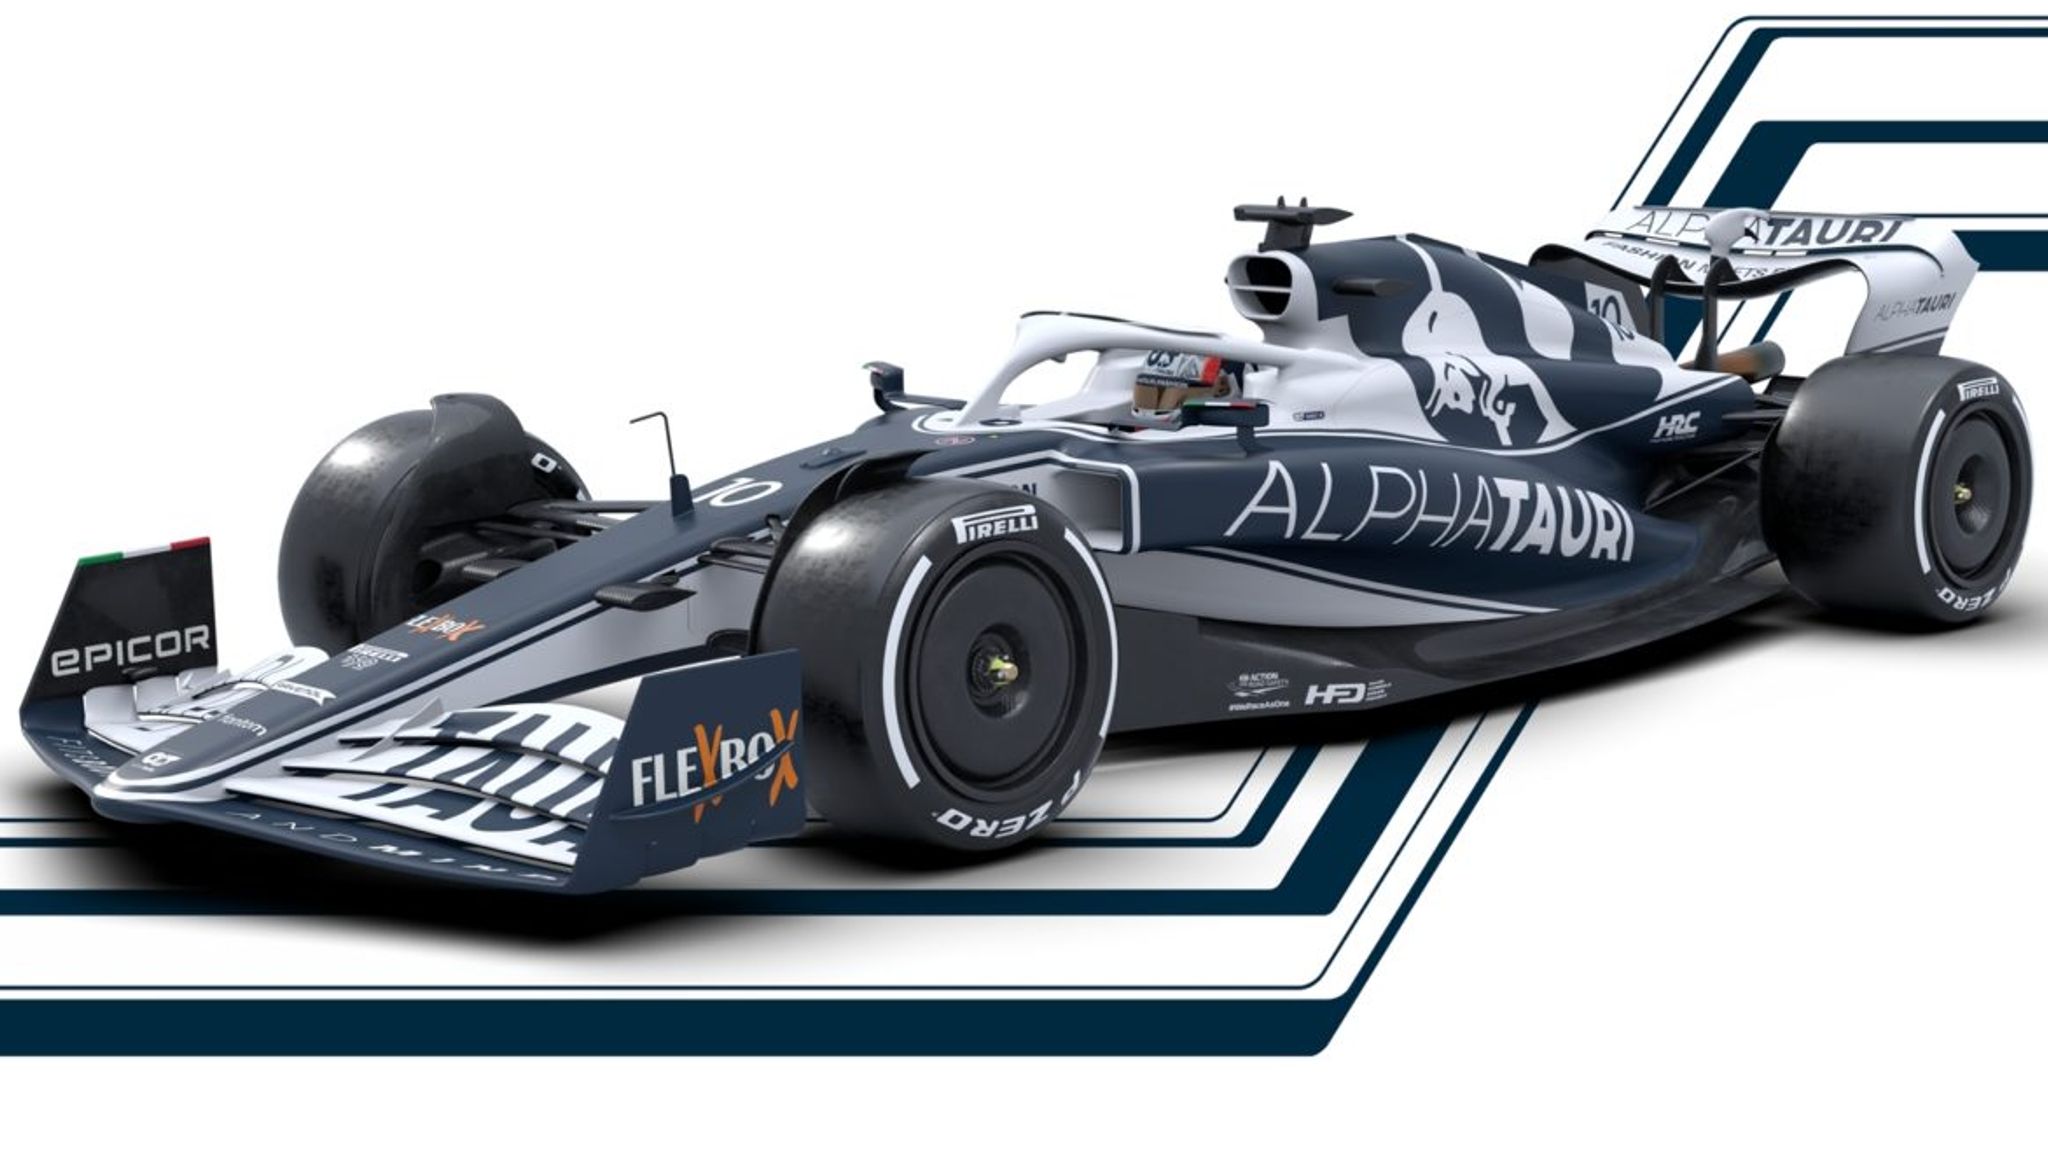 AlphaTauri launch F1 2022 car: Love is in the air for Red Bull's sister team as they reveal image of AT03